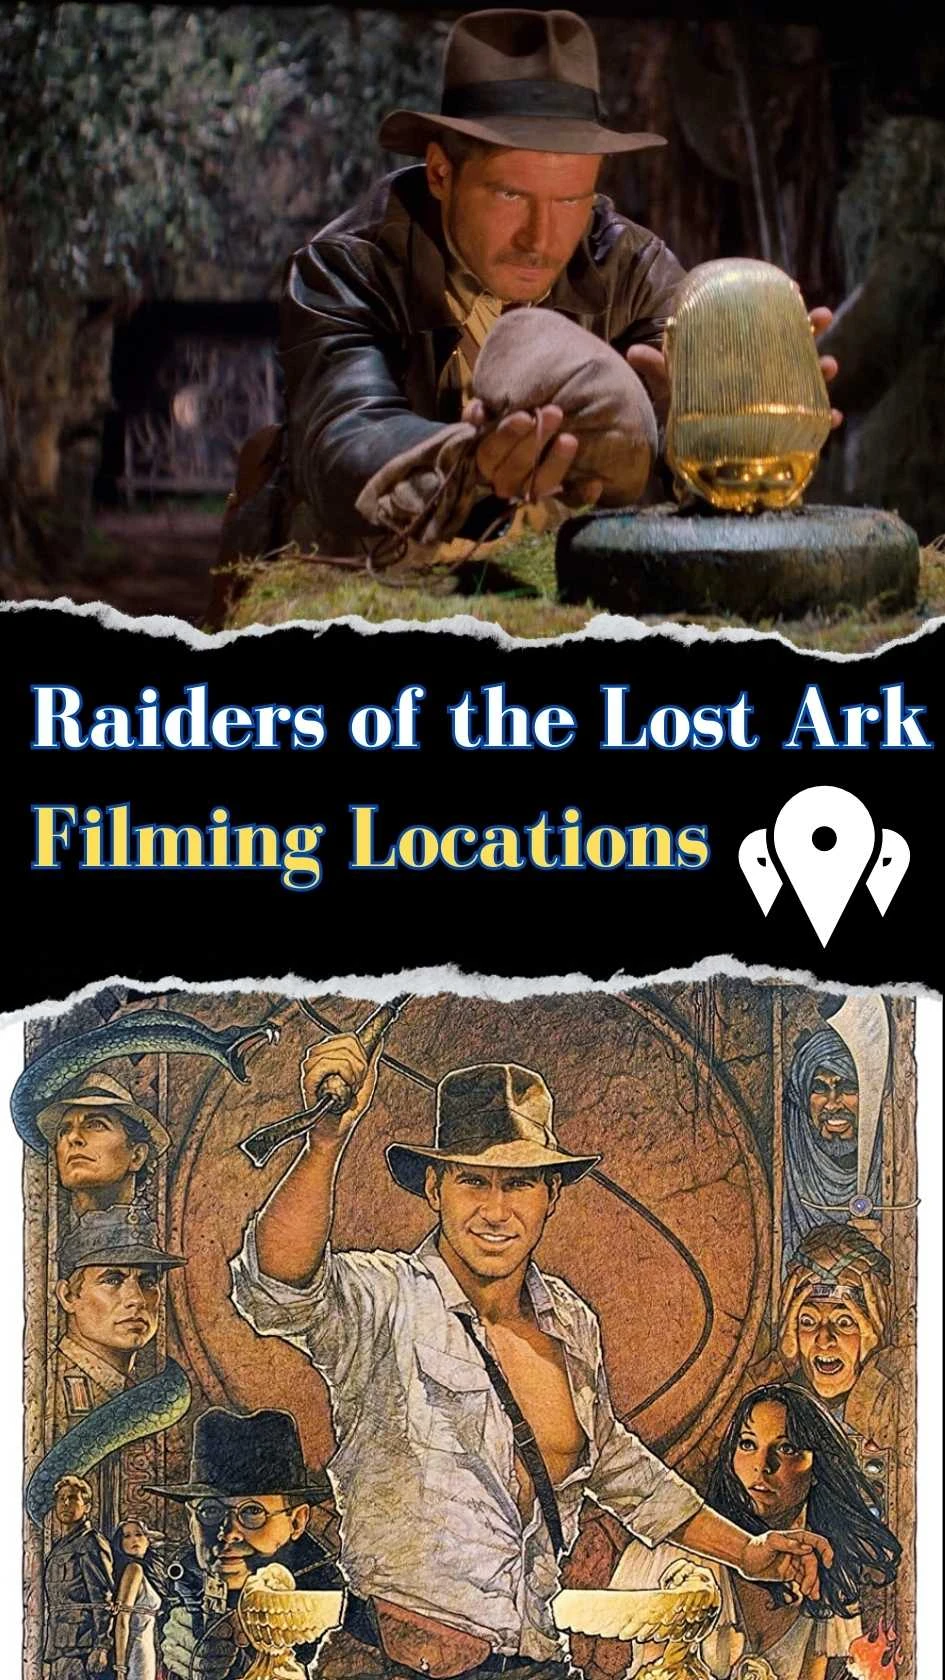 Raiders of the Lost Ark Filming Locations